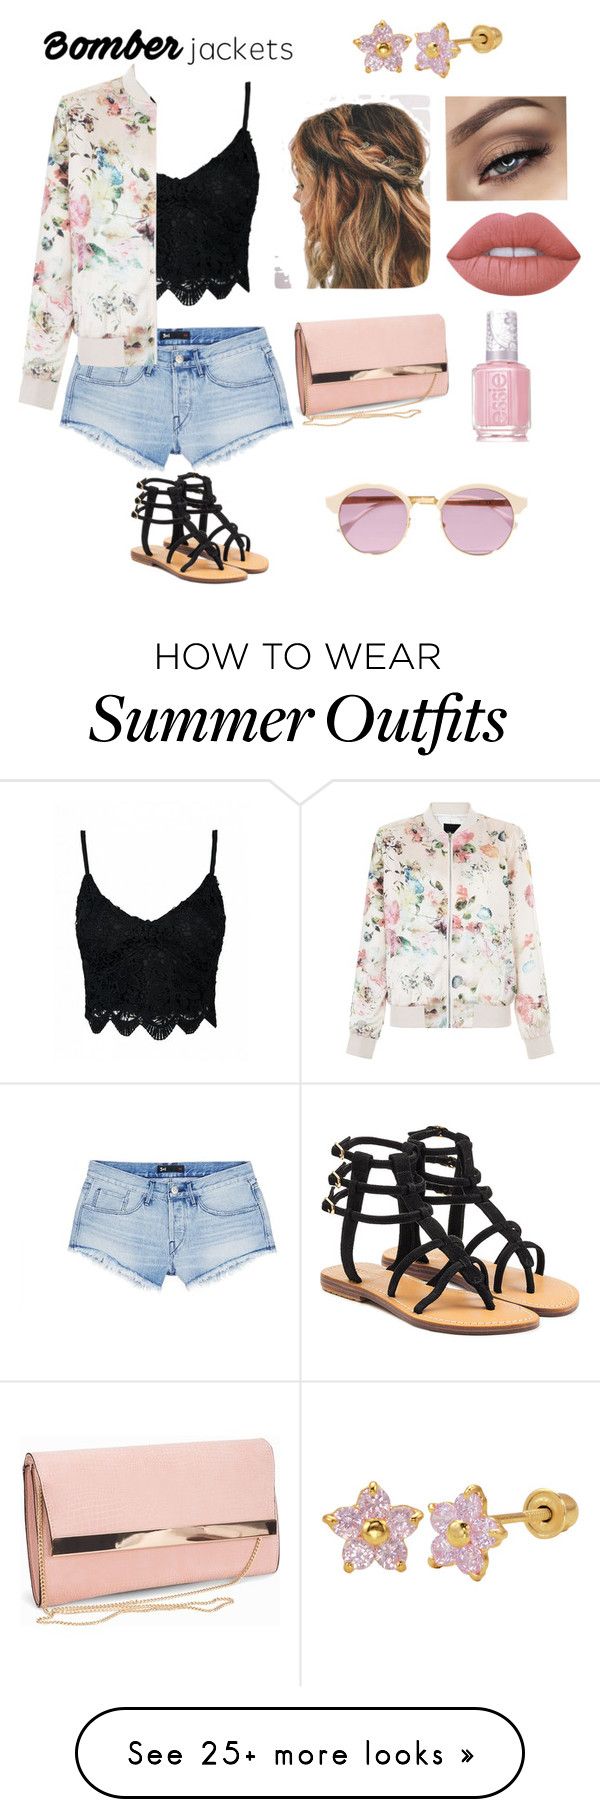 "Bomber jacket outfit" by depressednstressed on Polyvore featuring 3x1...